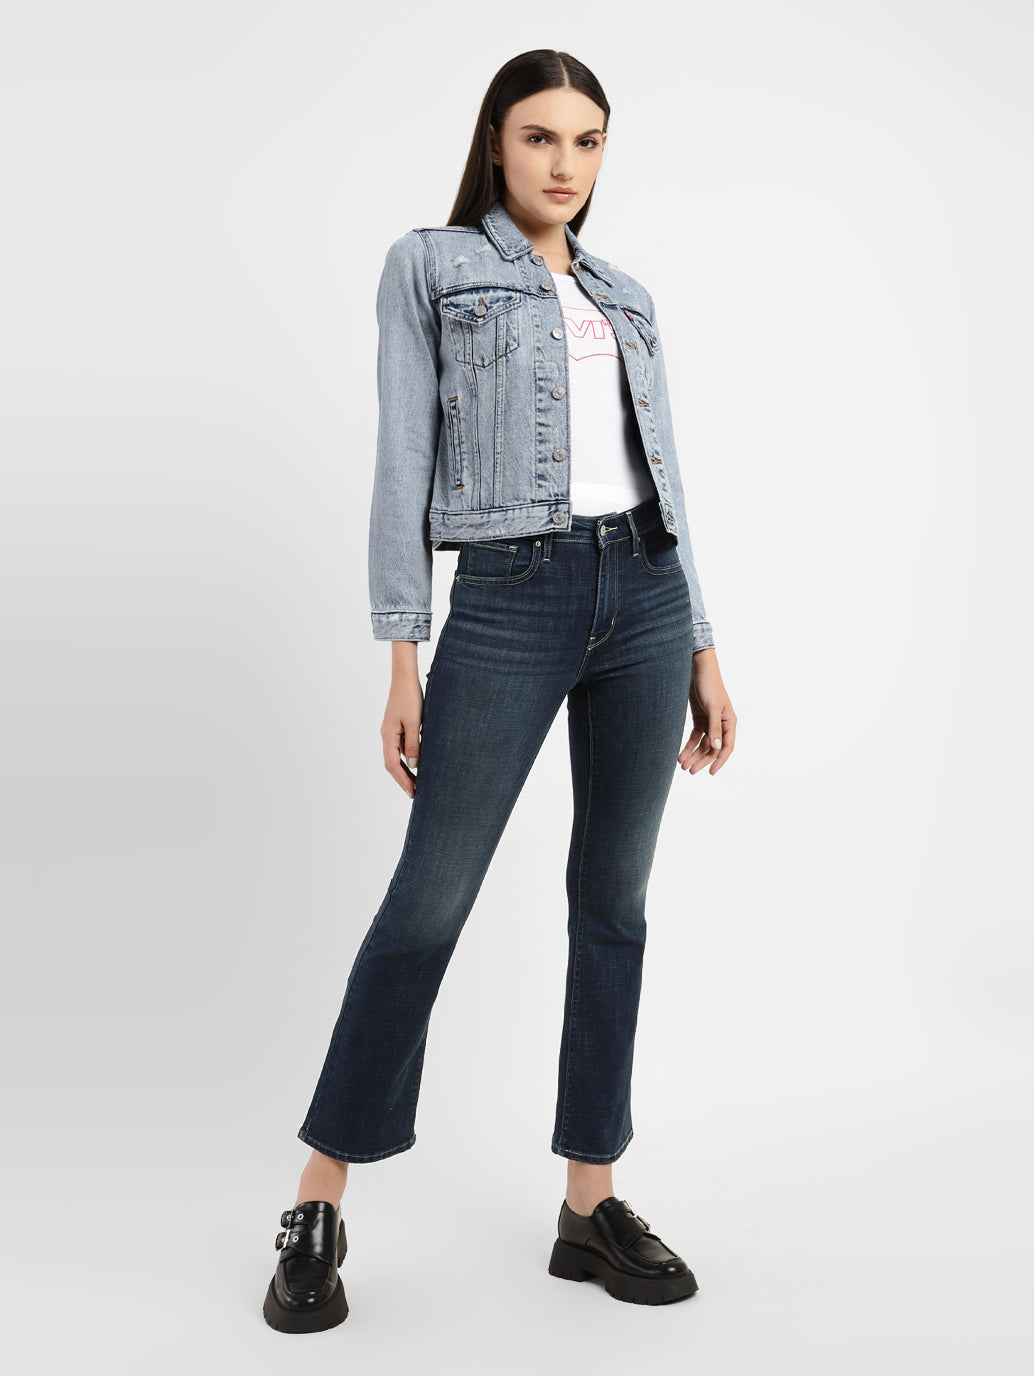 Shop 725 High Rise Bootcut Jeans for Women – Levis India Store